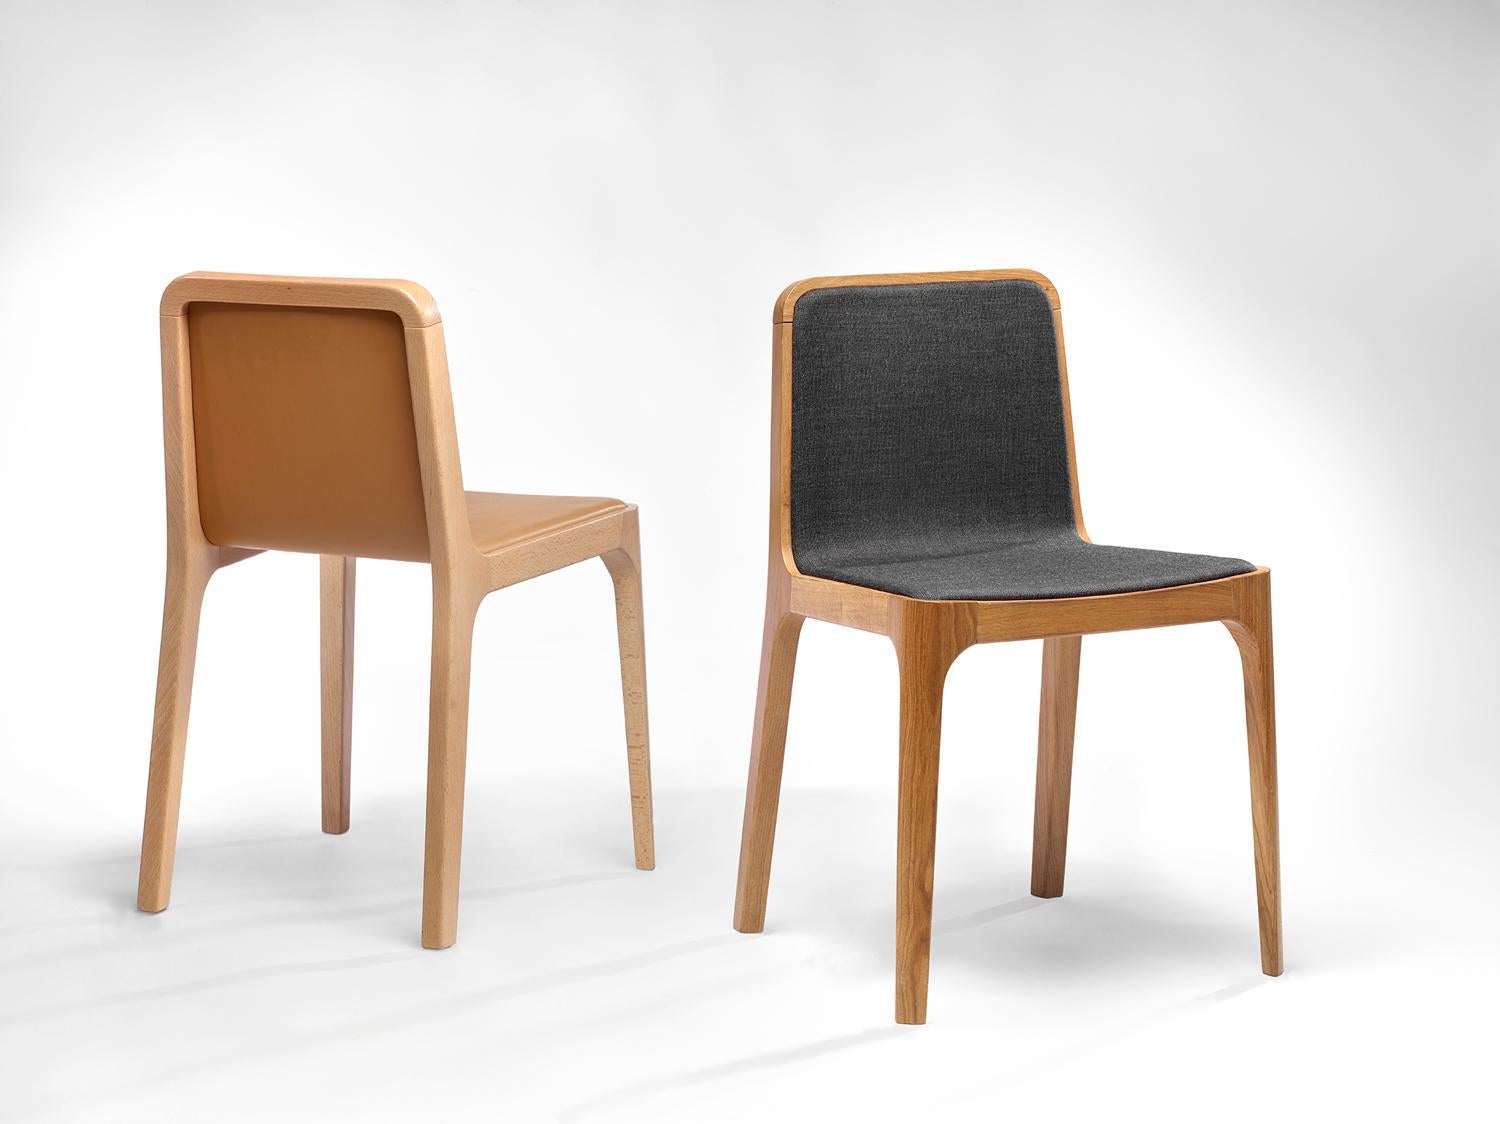 Minimalist Modern Chair in Oak Wood Fabric Upholstery In New Condition For Sale In Lisbon, PT